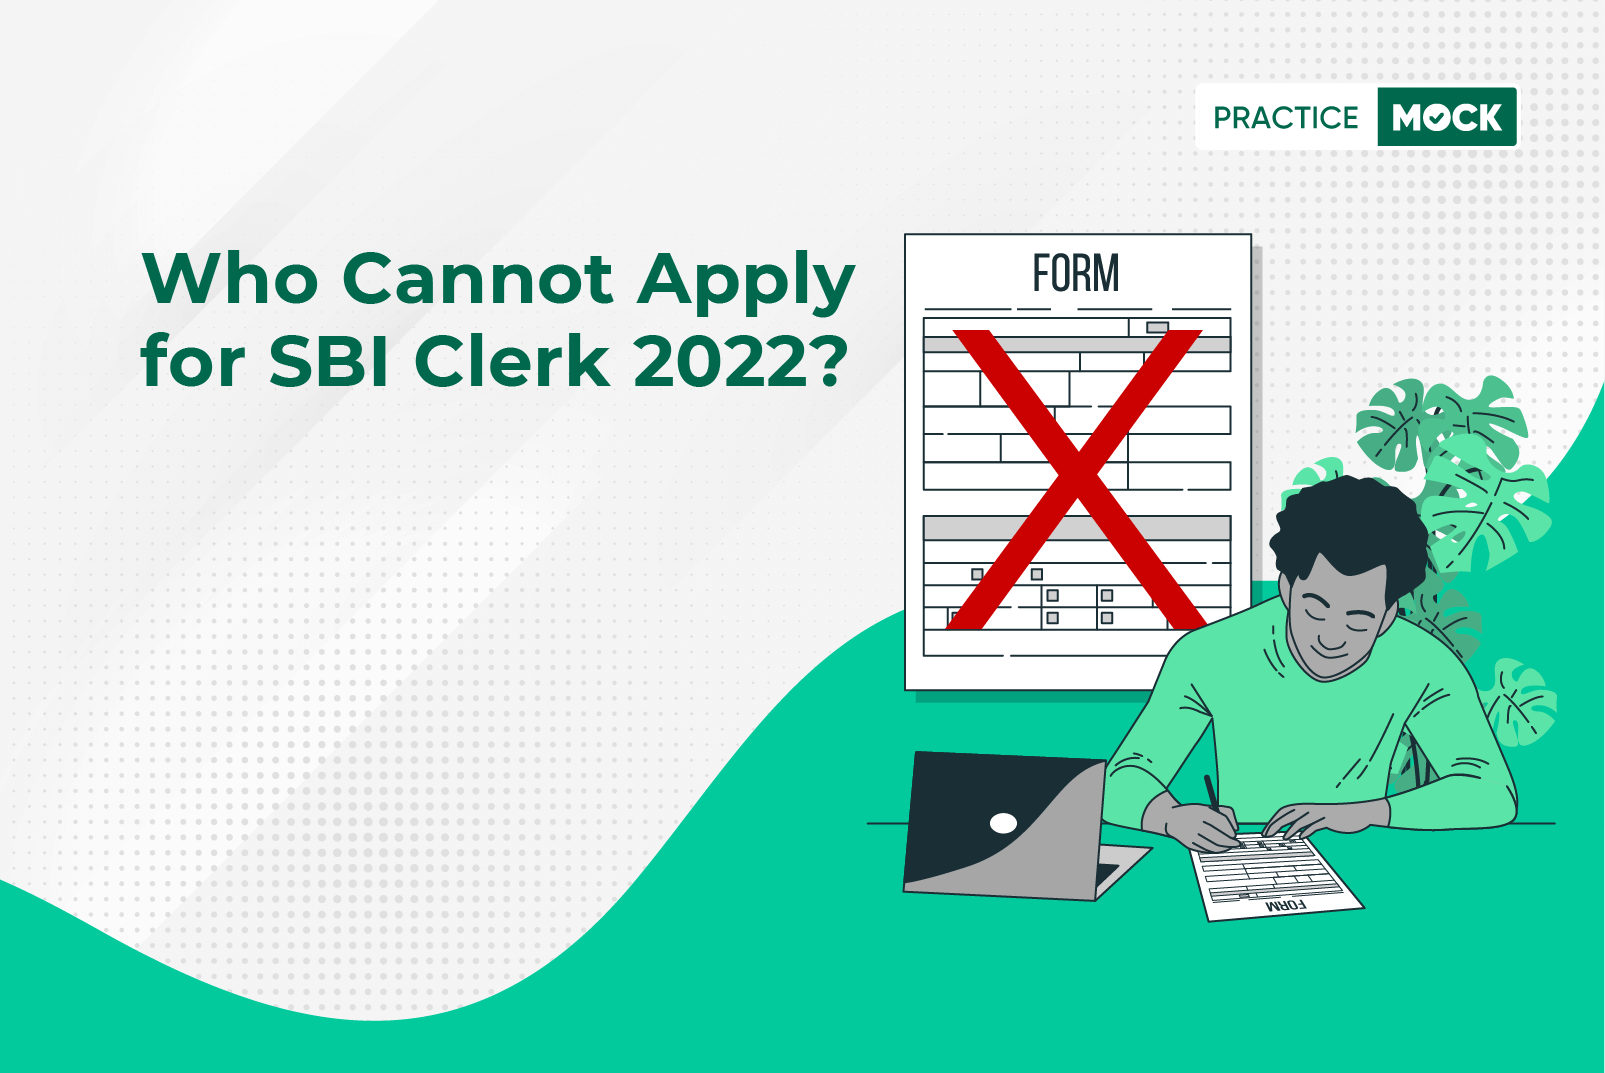 Who Cannot Apply for SBI Clerk 2022?